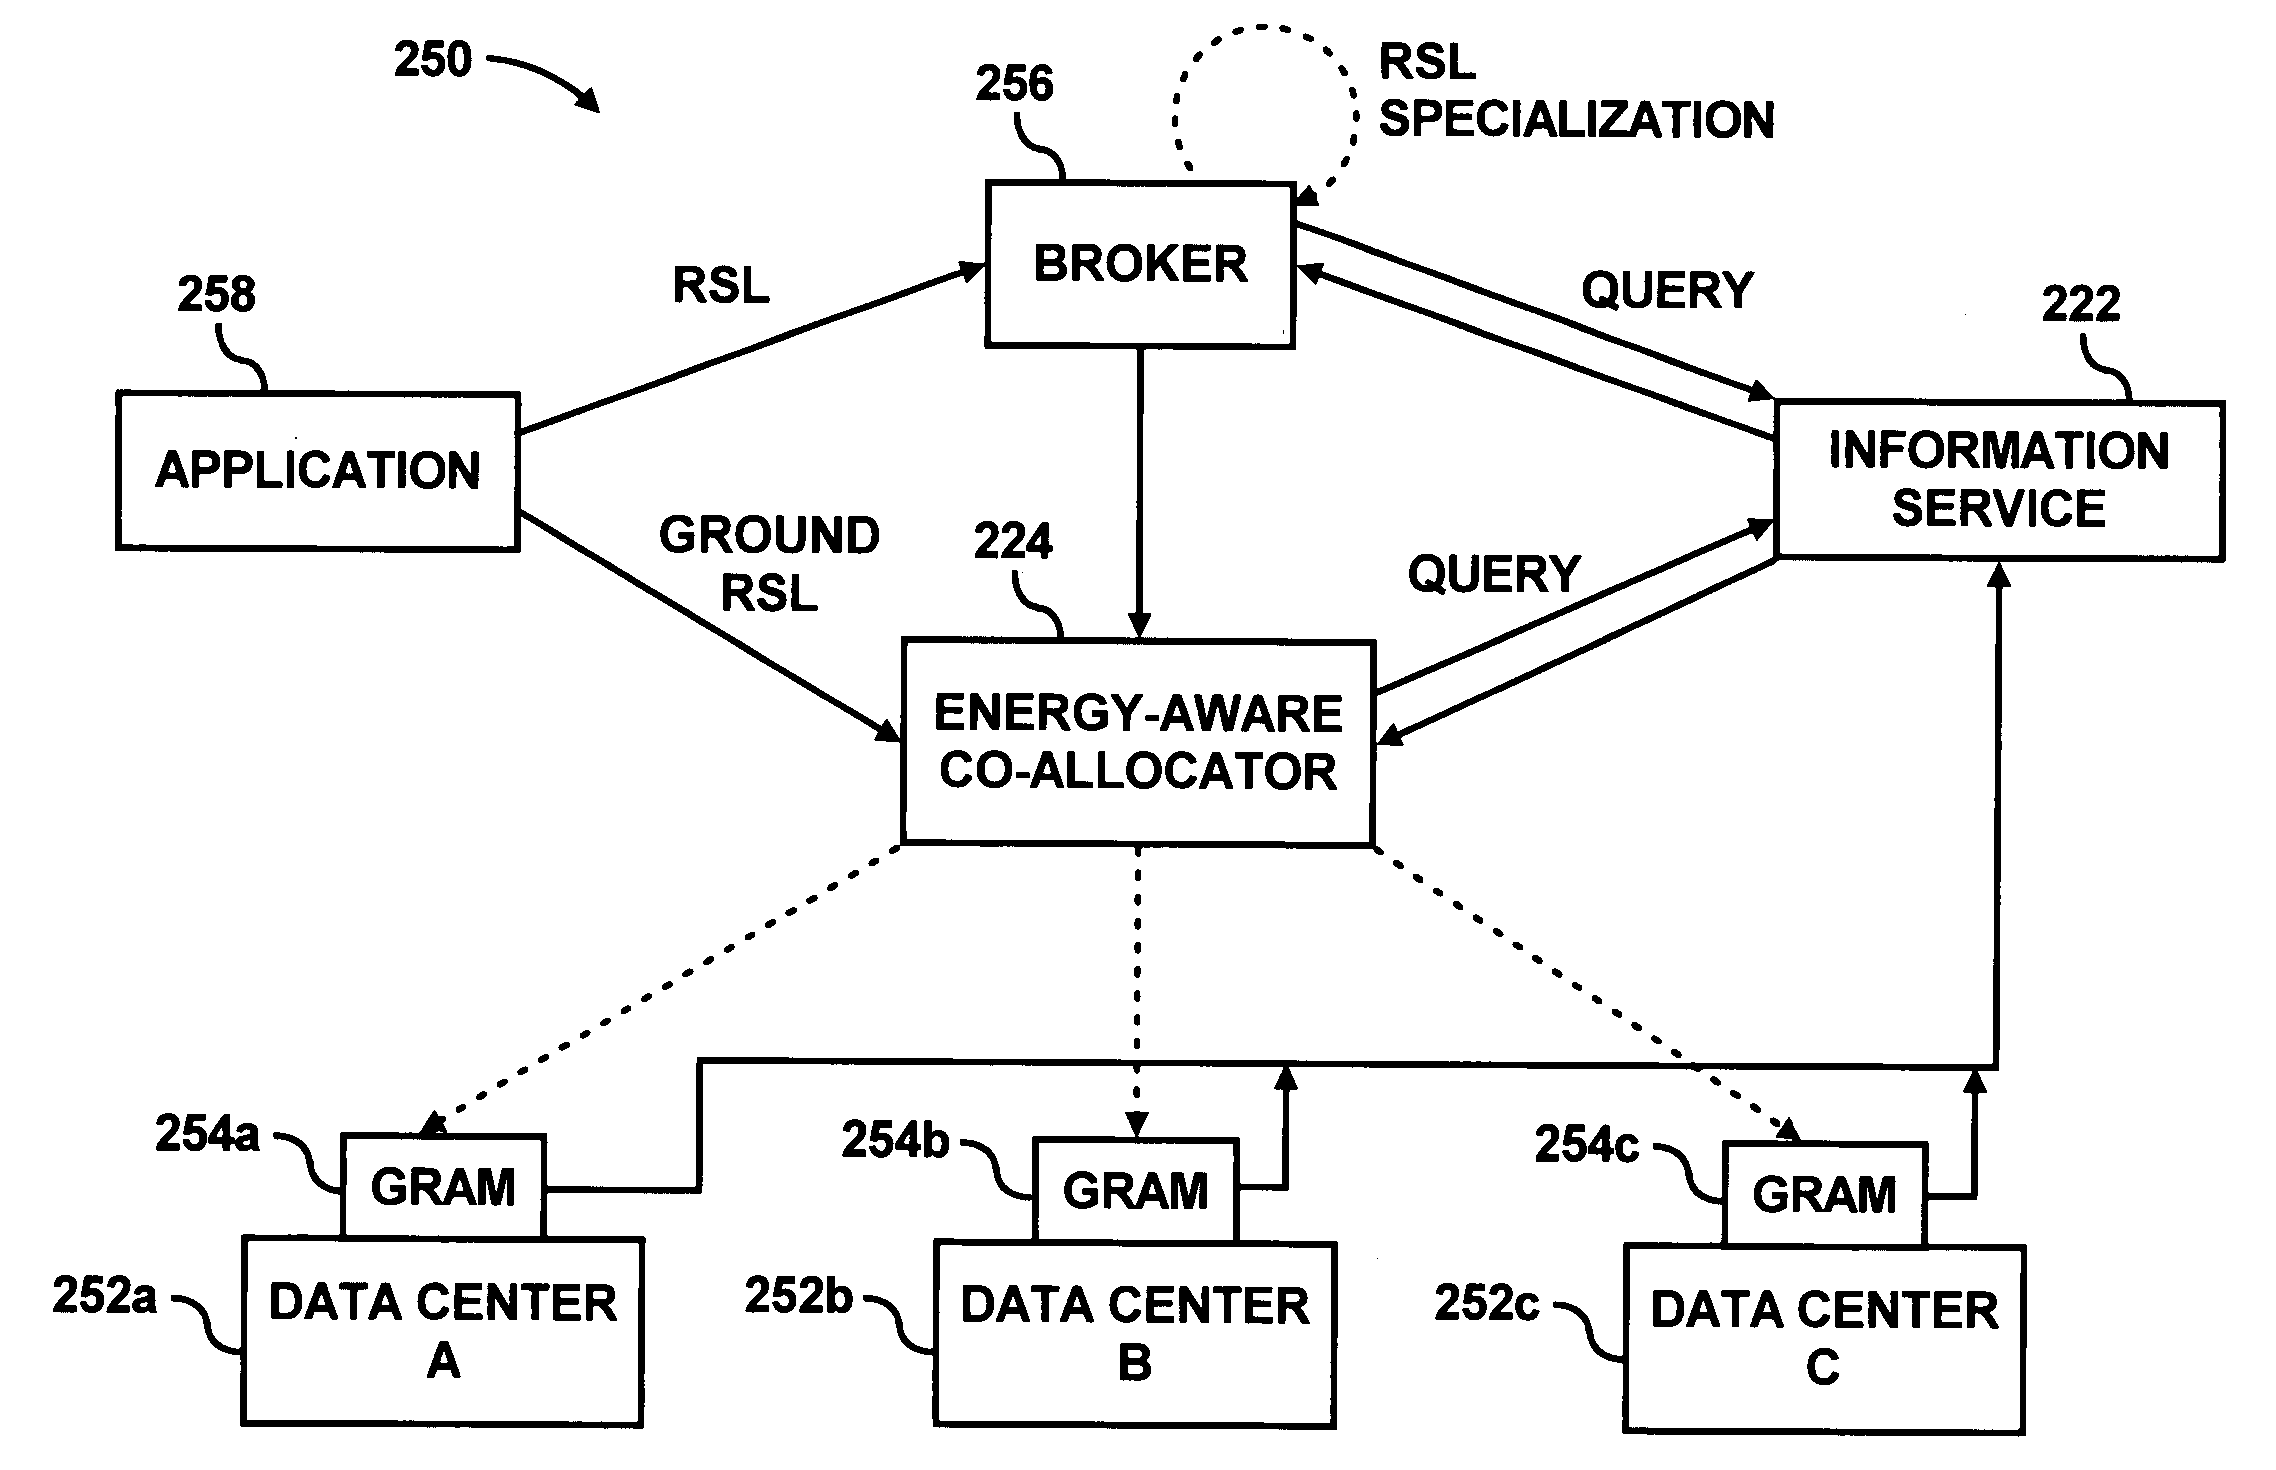 Workload placement among data centers based on thermal efficiency